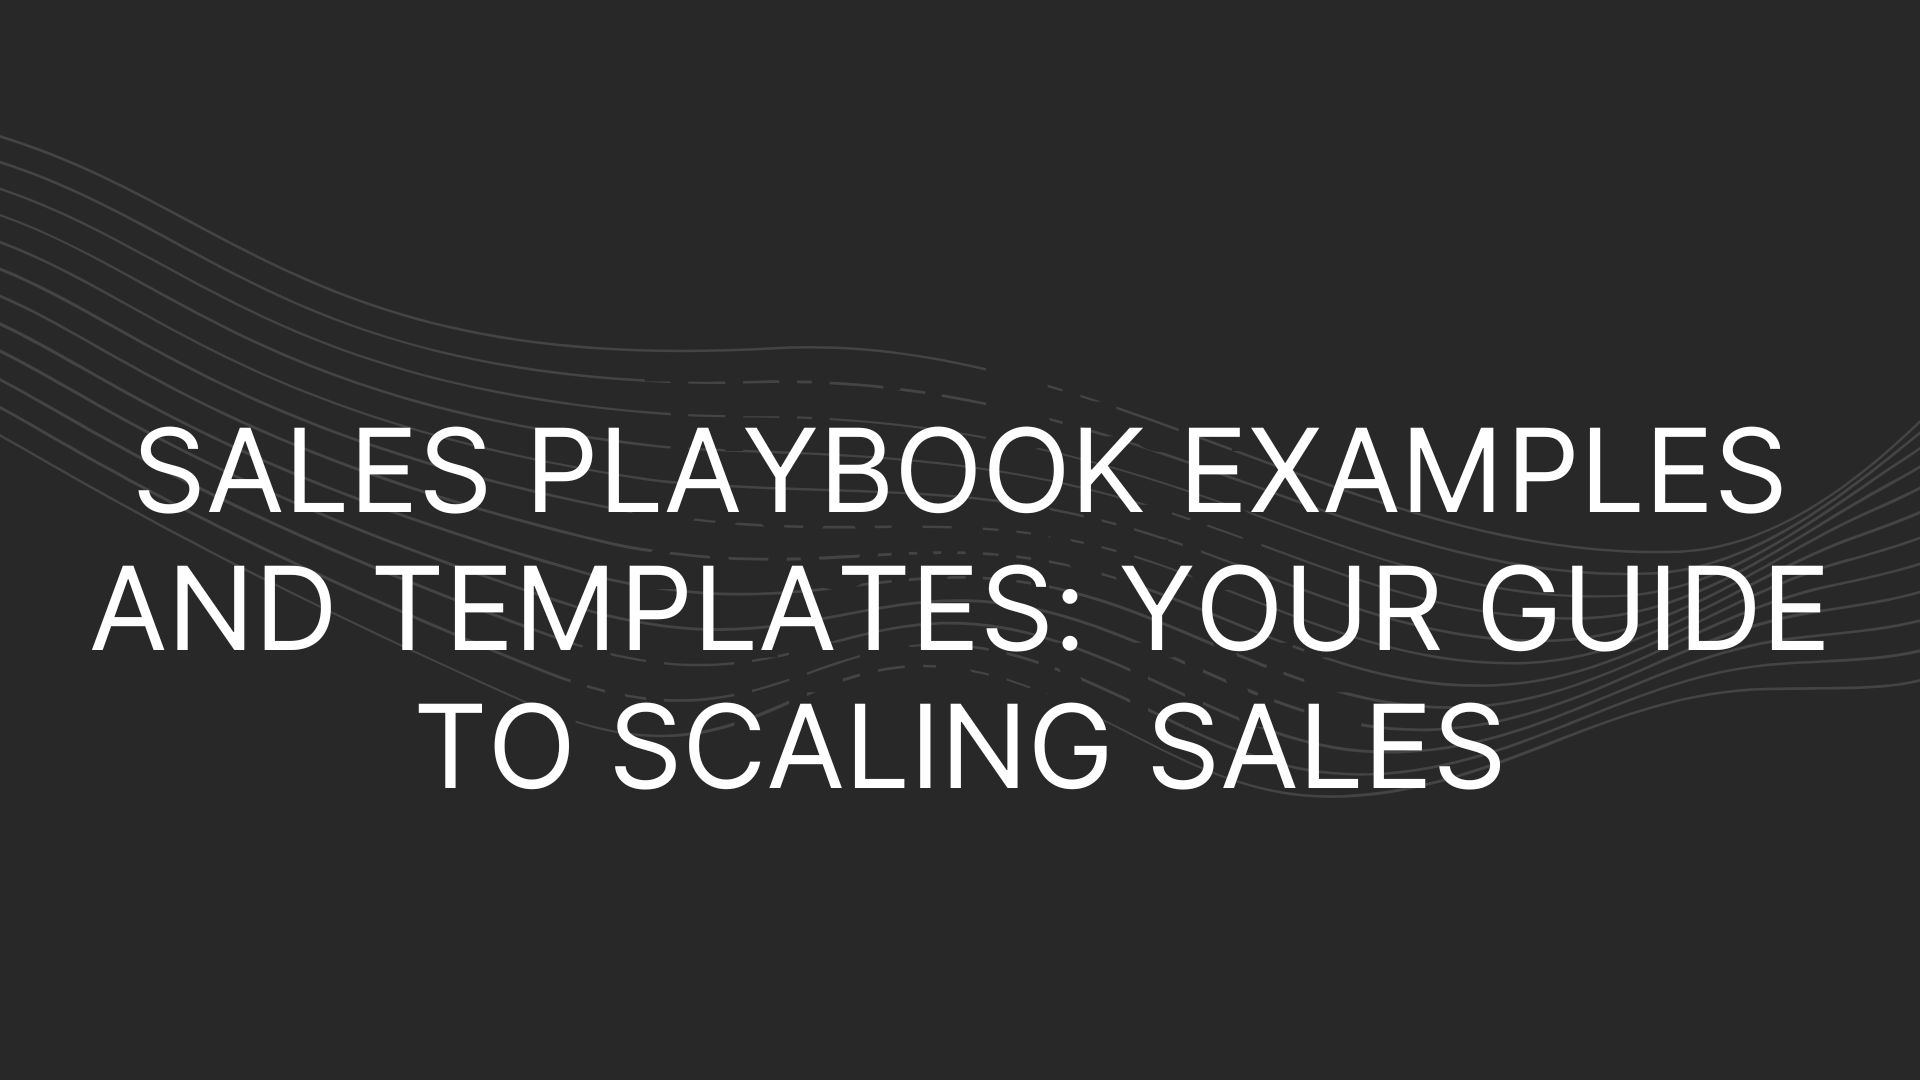 Sales Playbook Examples and Templates Your Guide to Scaling Sales